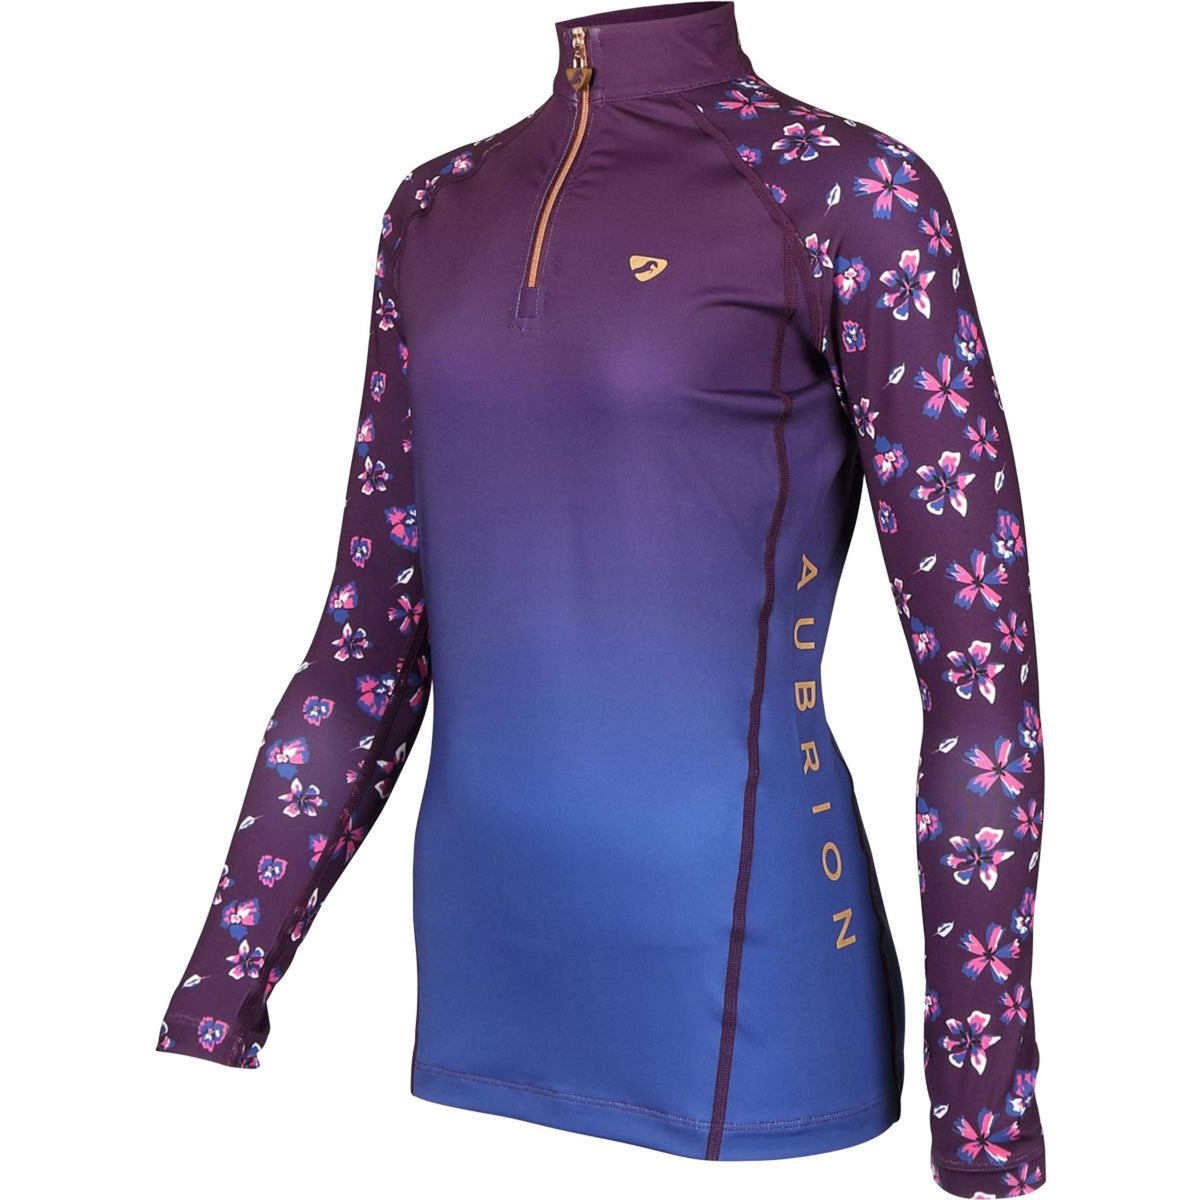 Aubrion Base Layer Hyde Park Young Rider Blume